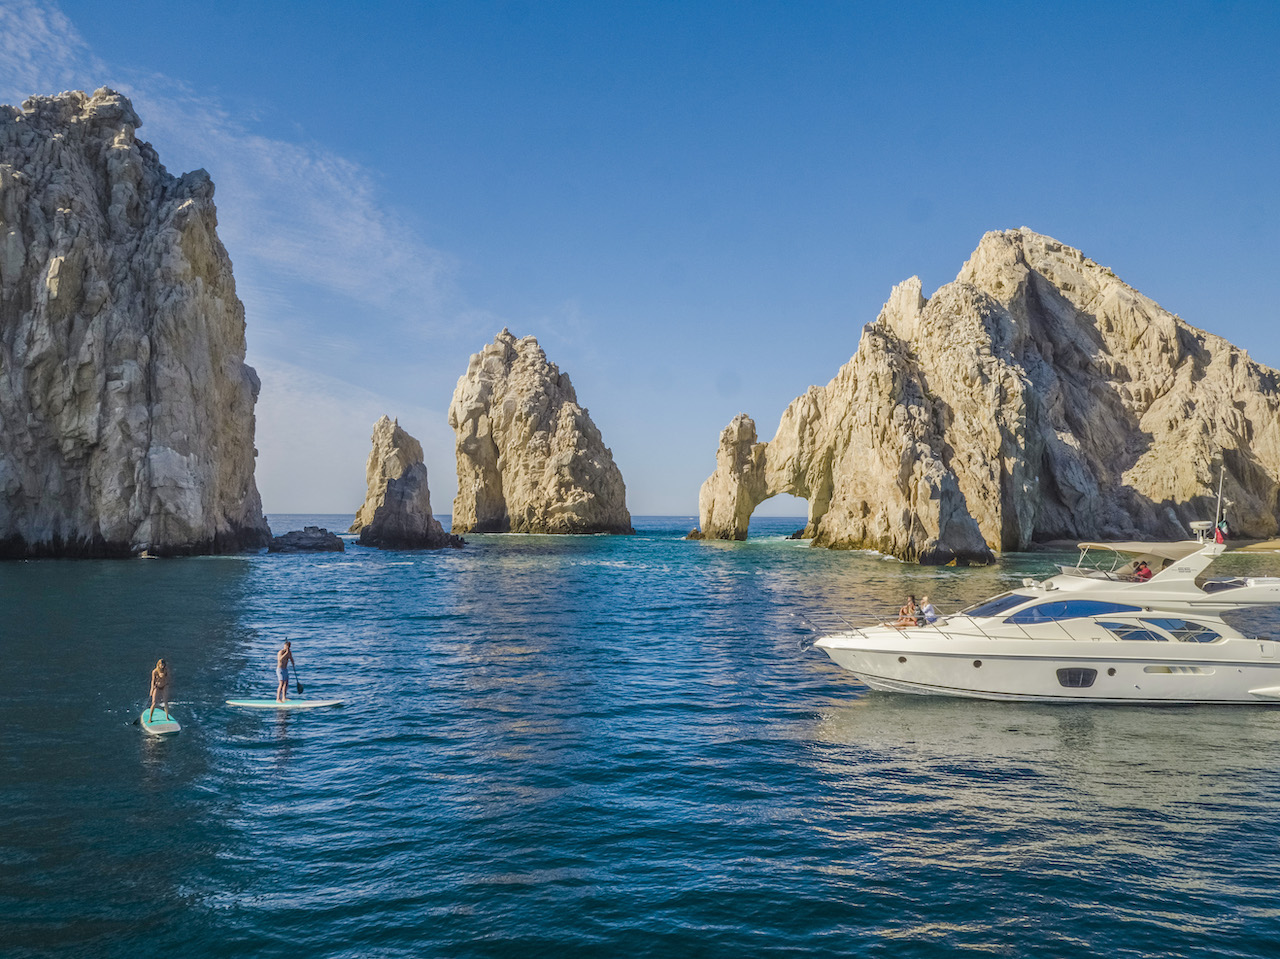 Grand Velas Los Cabos' new luxury ocean safari features one-on-one marine environment education during an exciting open ocean safari aboard a private yacht.